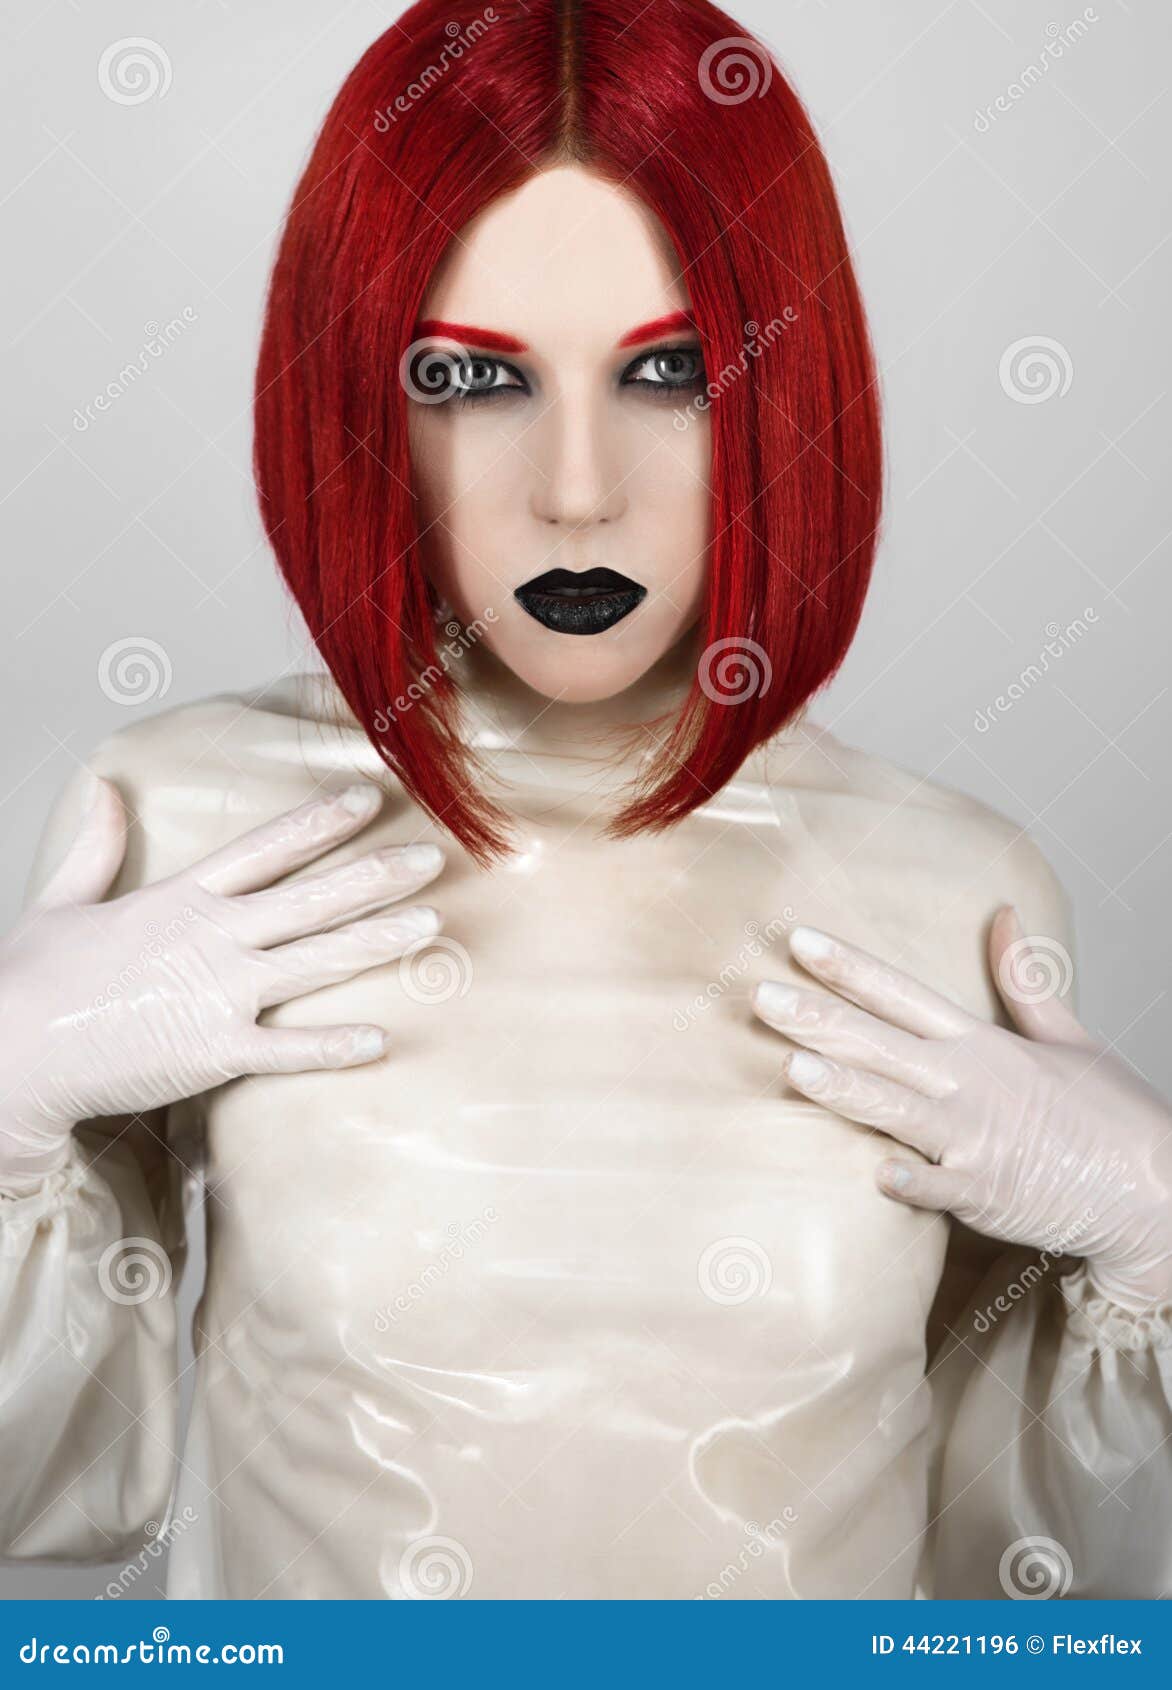 Woman with Red Hair in Latex Blouse Stock Photo - Image of woman, lips:  44221196